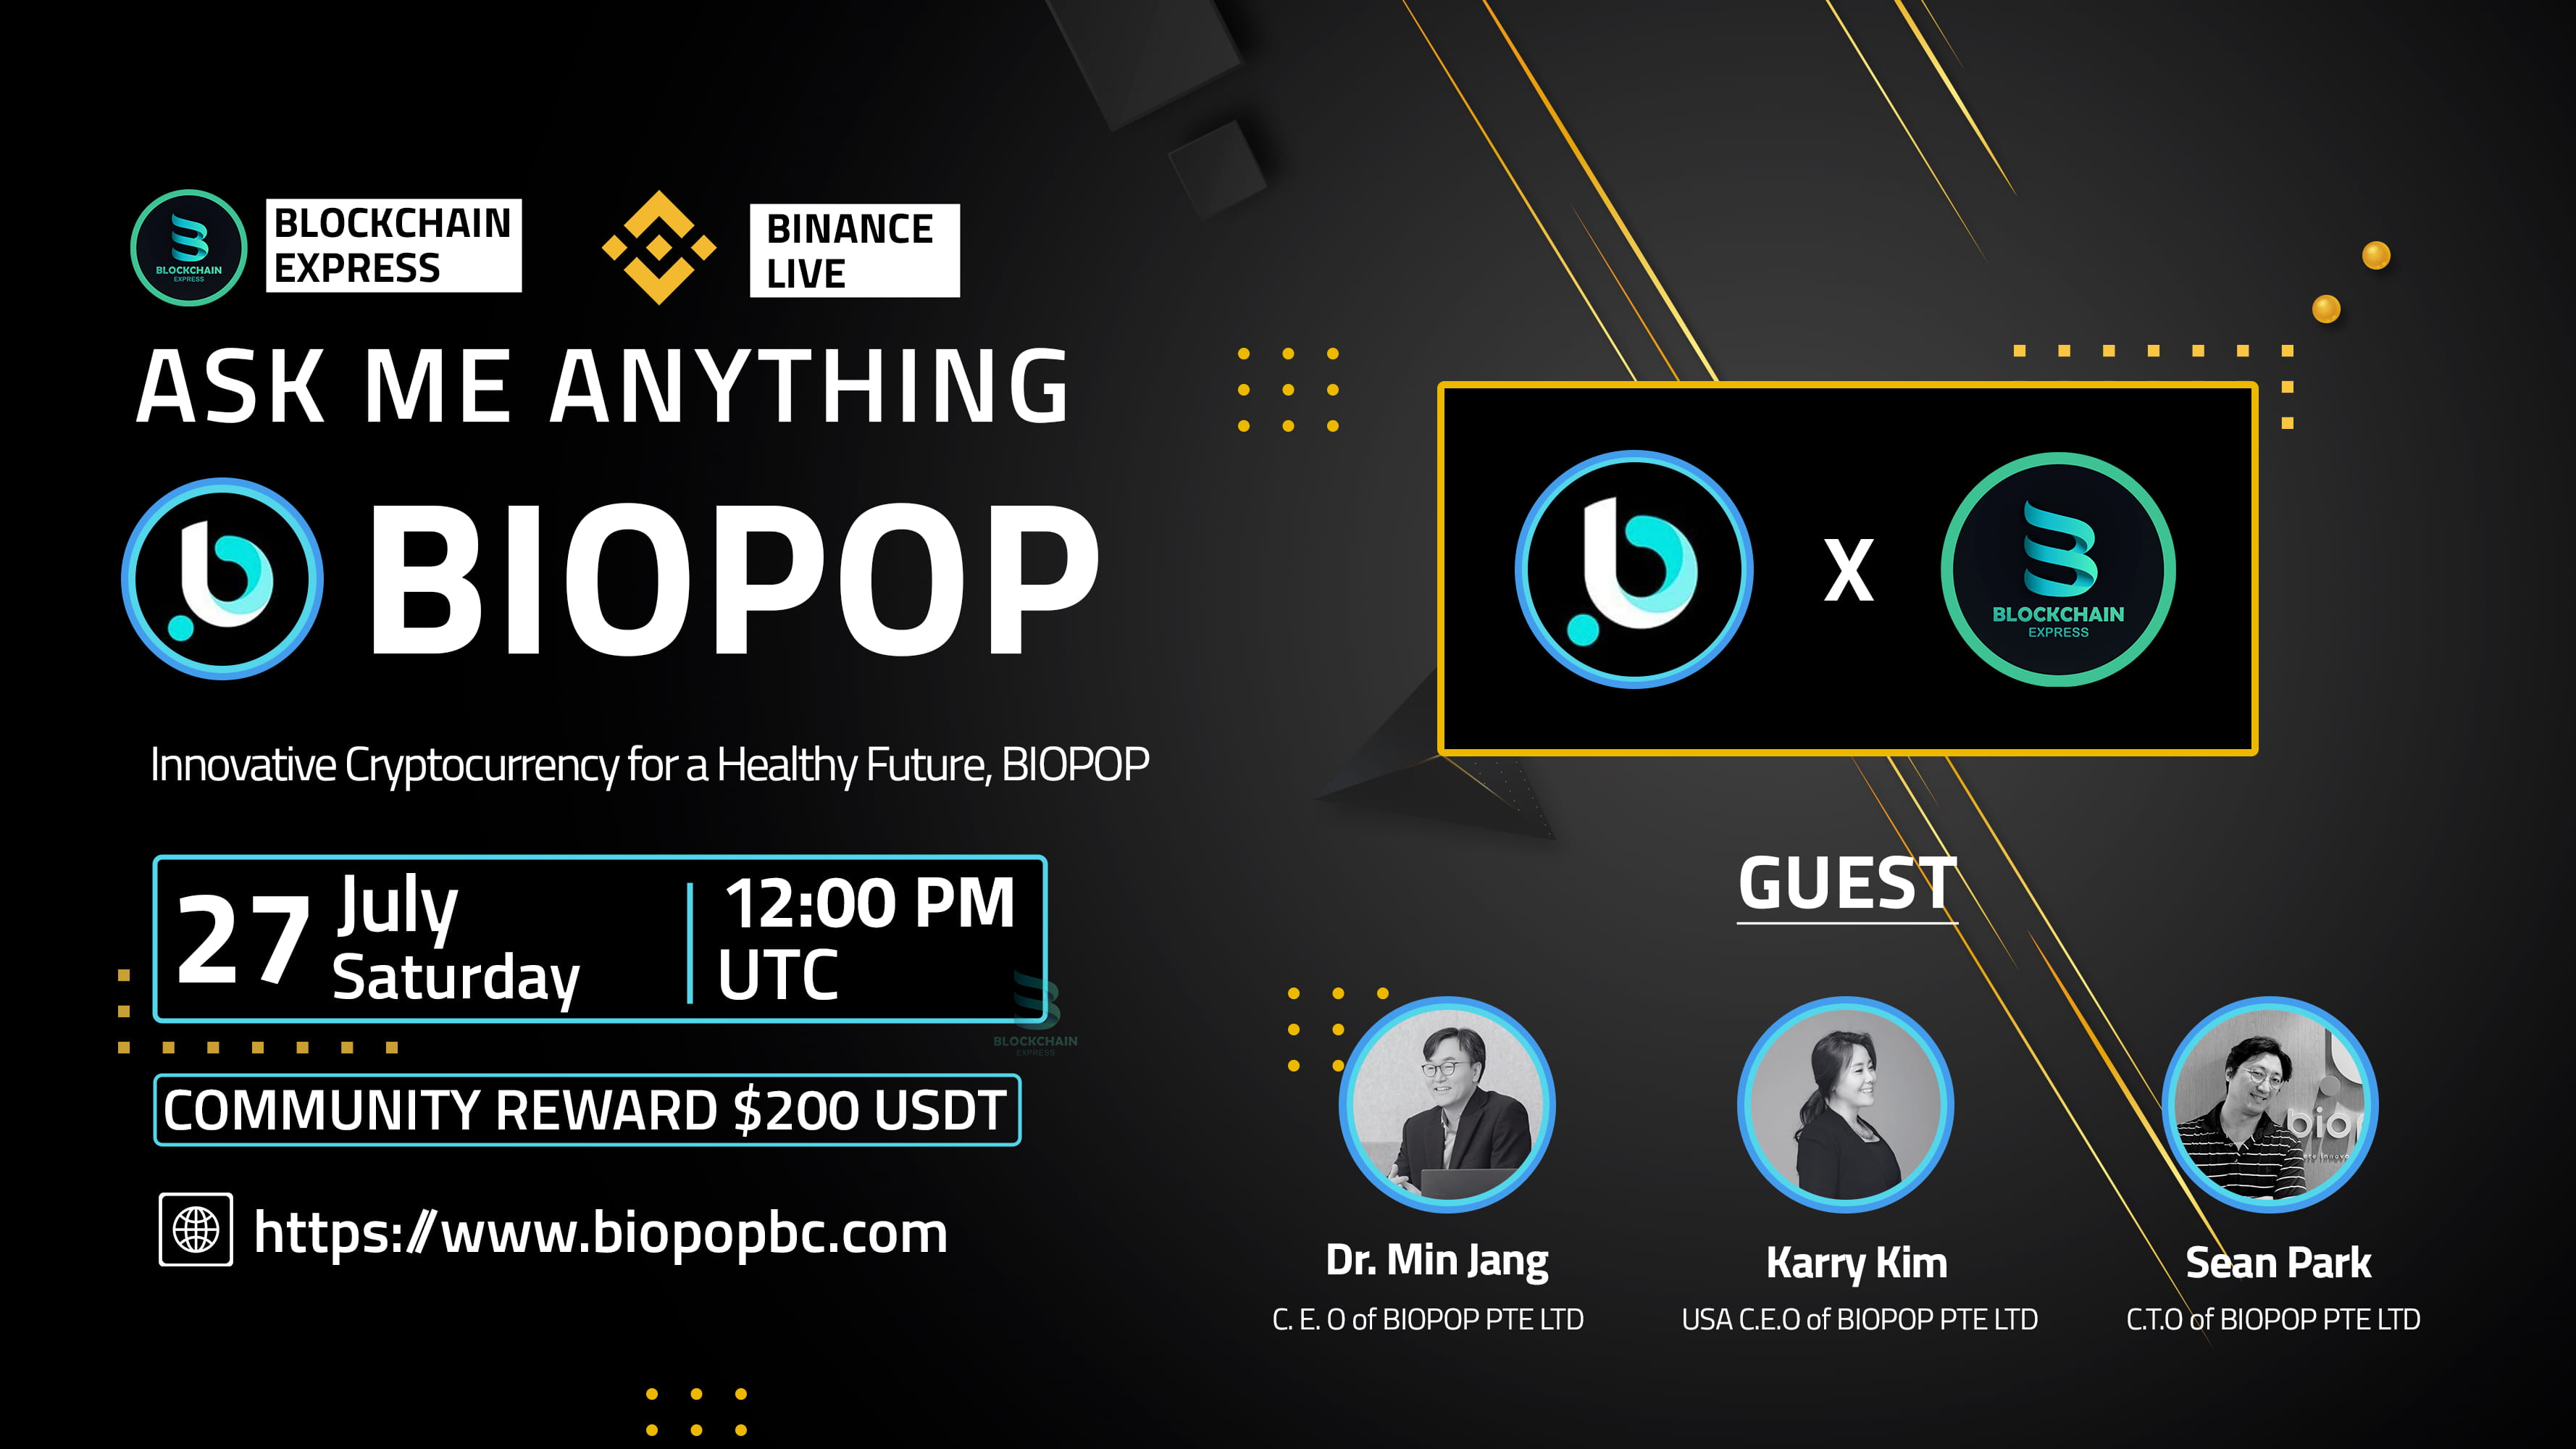 ₿lockchain Express will be hosting an AMA session with" Biopop "